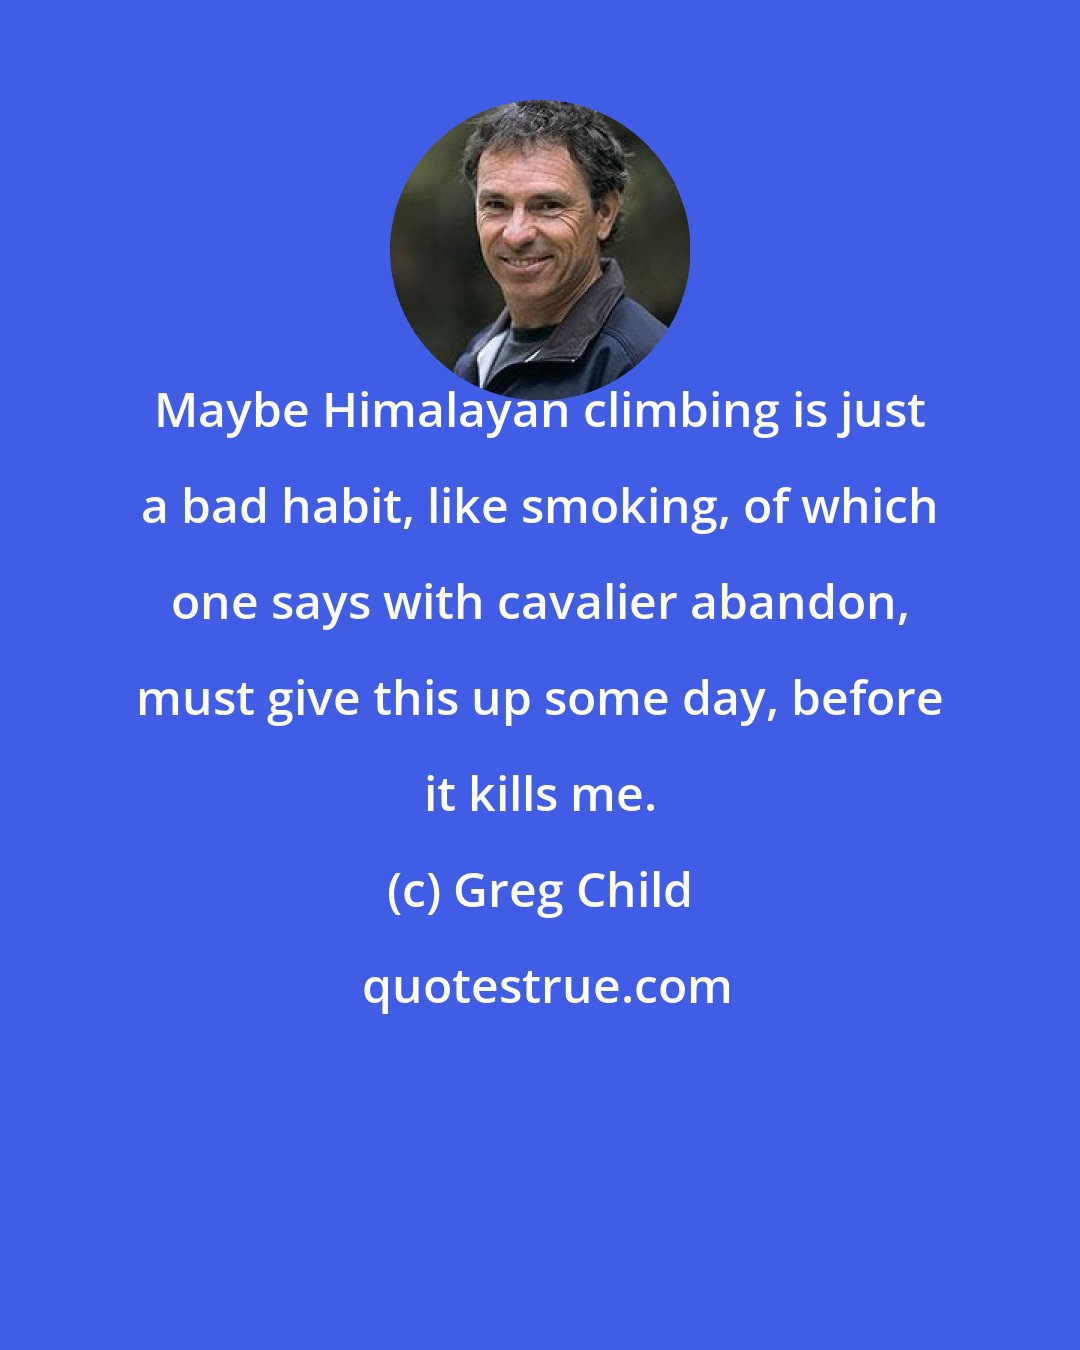 Greg Child: Maybe Himalayan climbing is just a bad habit, like smoking, of which one says with cavalier abandon, must give this up some day, before it kills me.